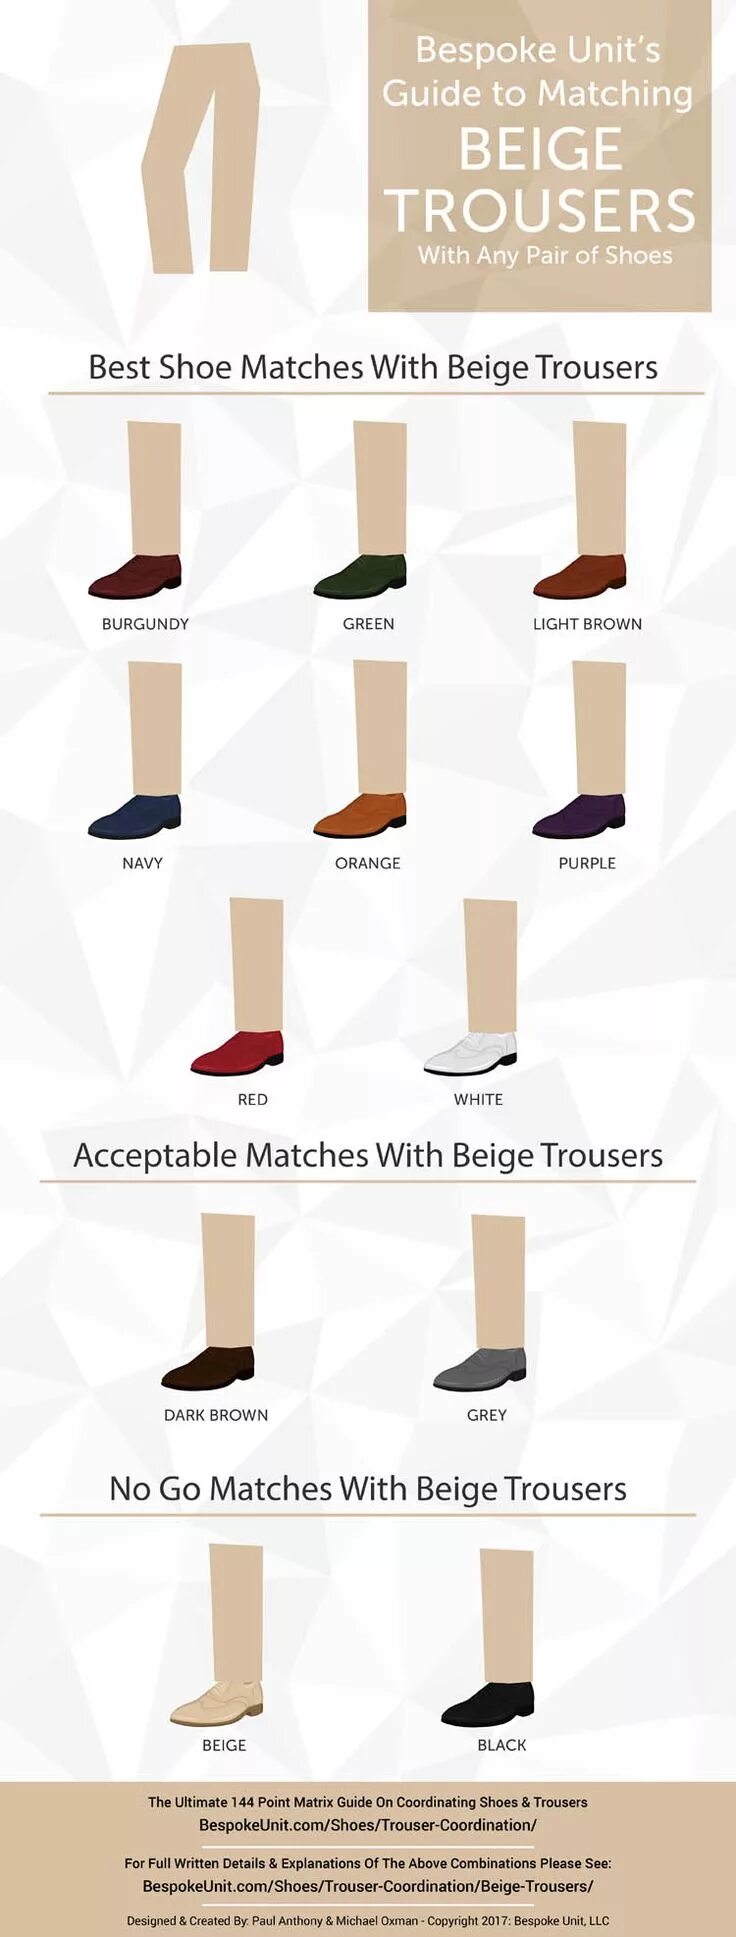 Match guide. Men Beige trousers. Beige Shoes with wide trousers. Цвет носков под бежевые брюки. Best Combos for men for Beige trousers.